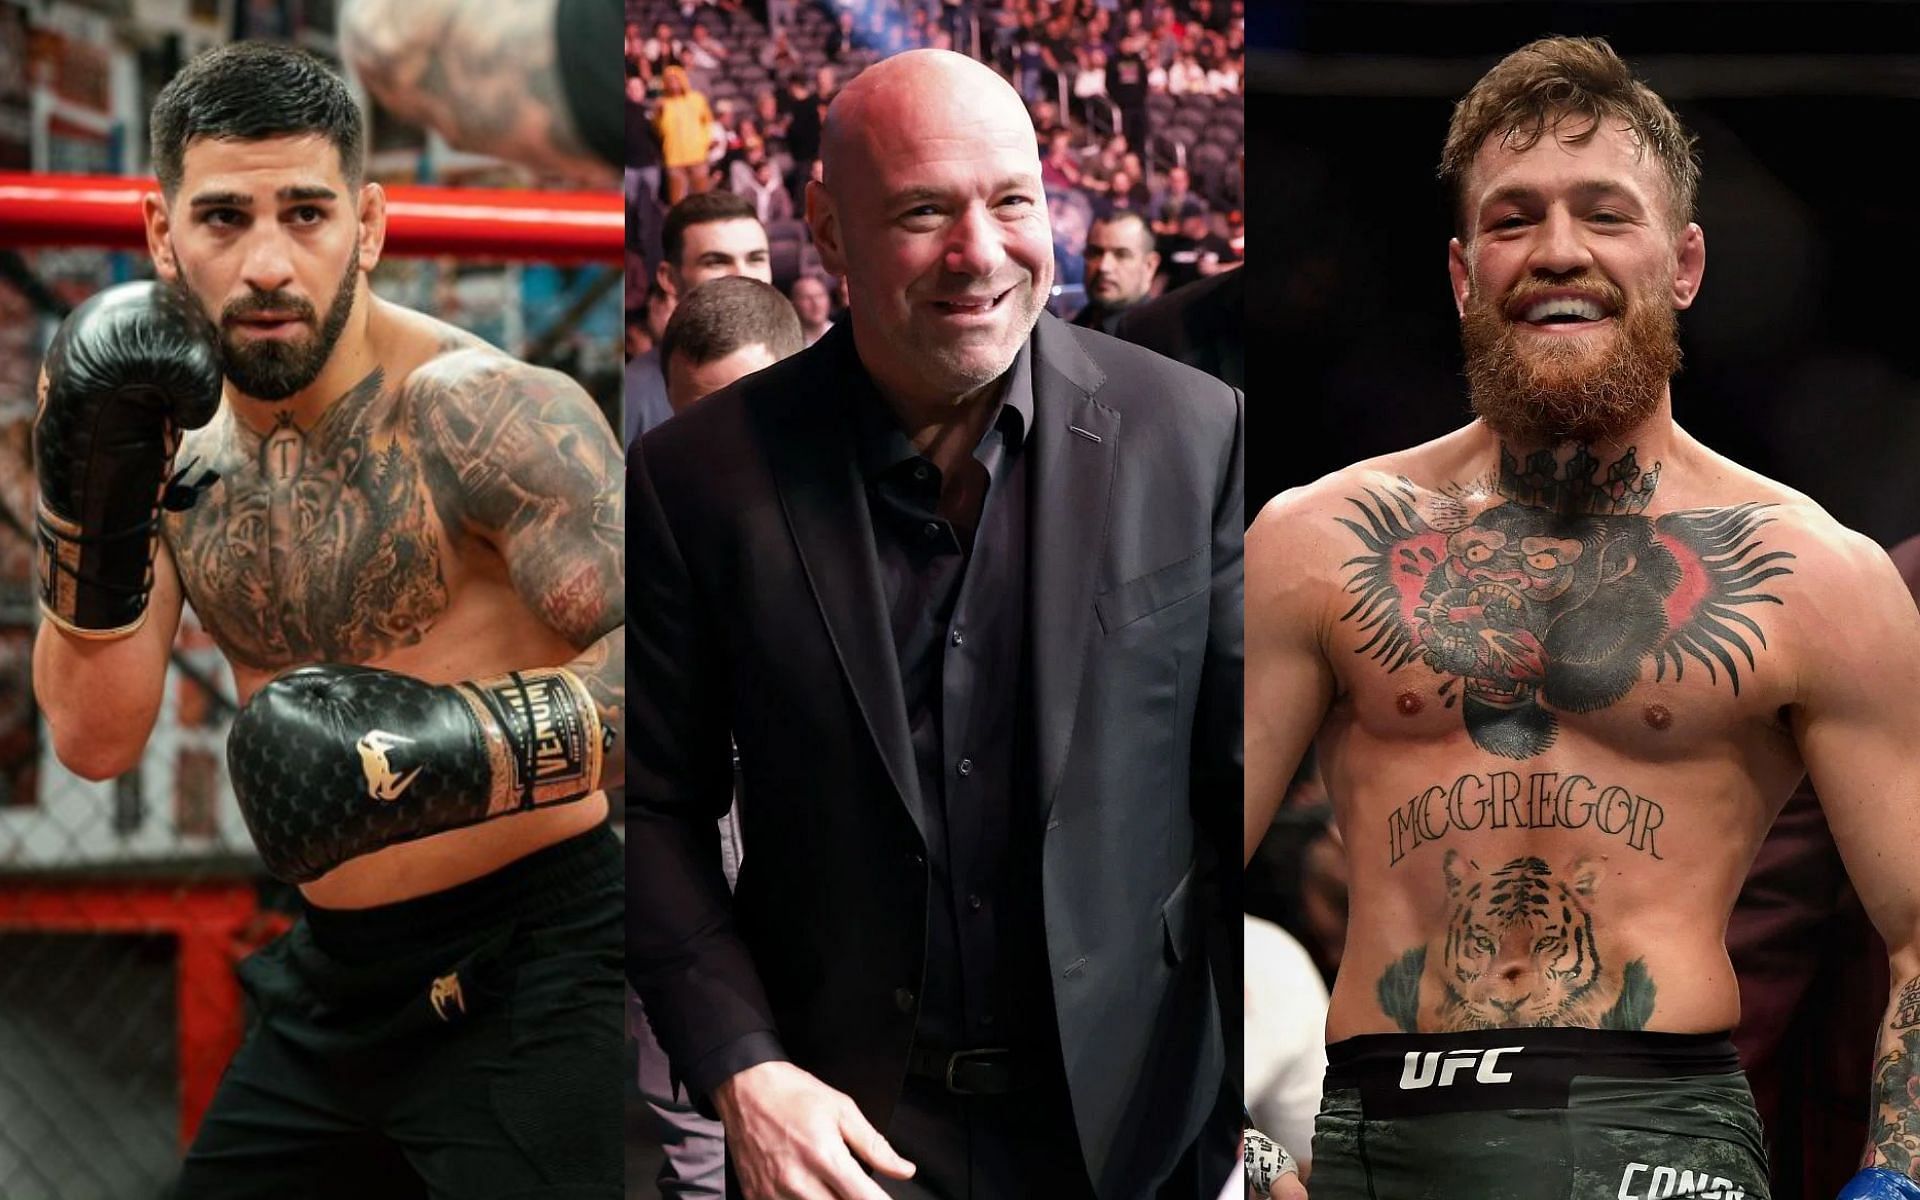 Ilia Topuria (left) shares response to Dana White (middle) ruling out a Conor McGregor (right) return to featherweight [Images Courtesy: @GettyImages and @iliatopuria on Instagram]